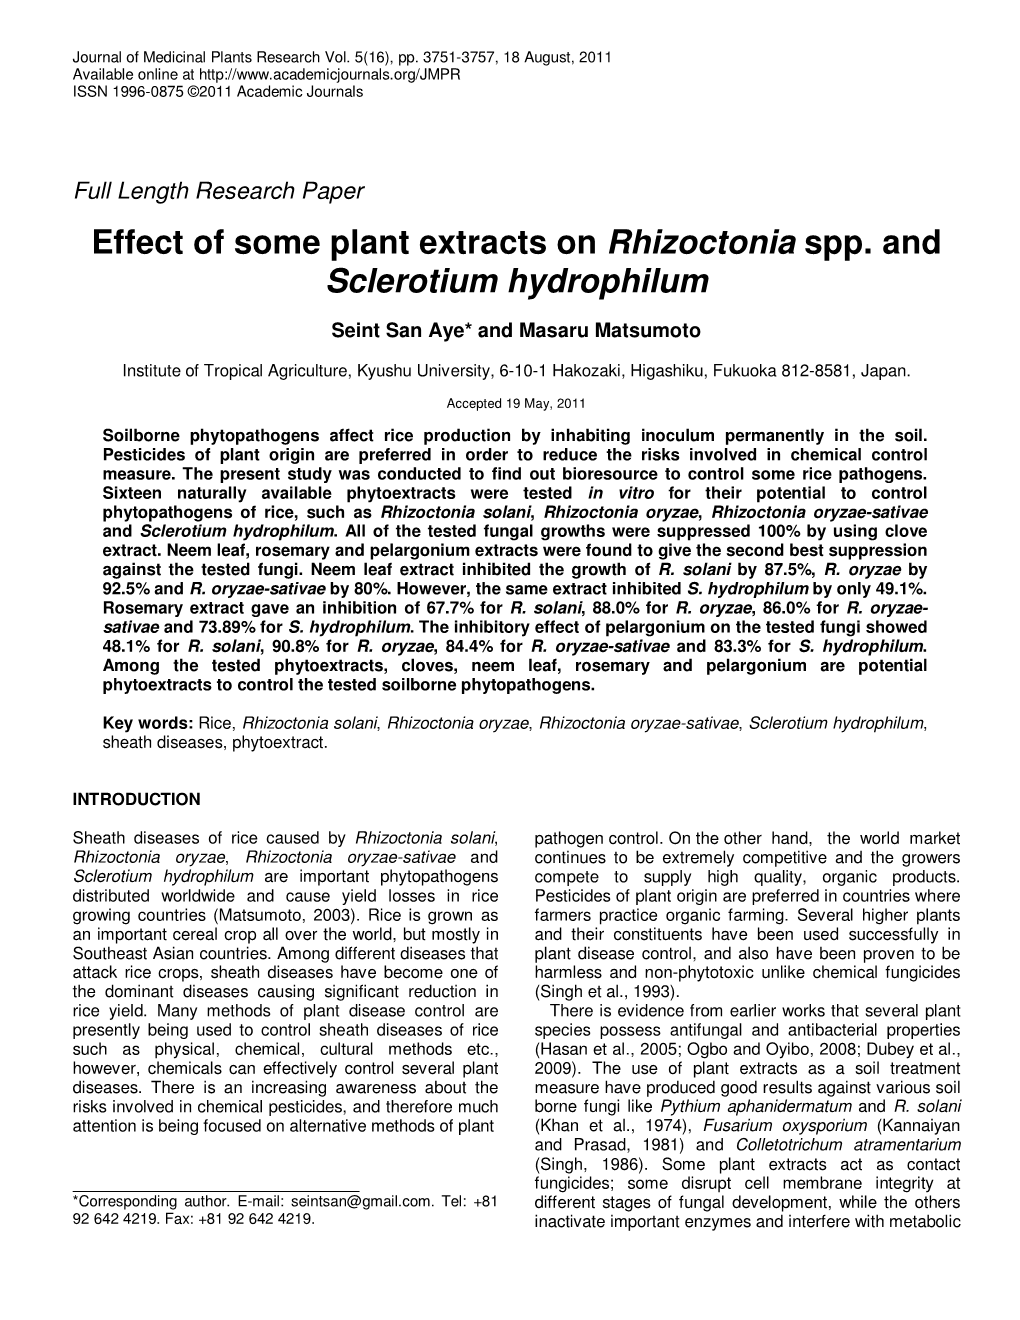 Effect of Some Plant Extracts on Rhizoctonia Spp. and Sclerotium Hydrophilum